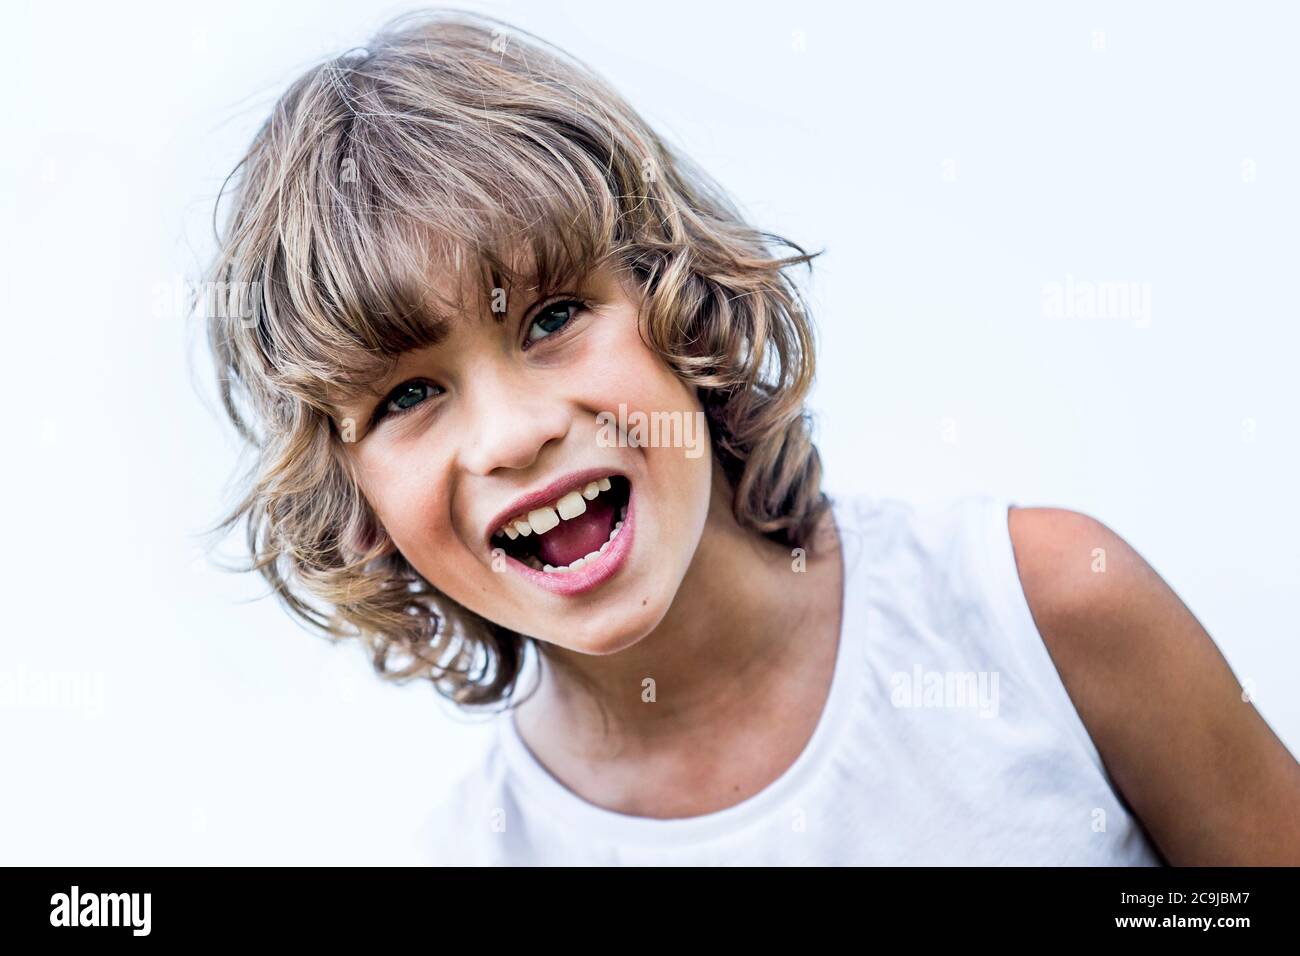 Boy with blonde hair shouting in park. Stock Photo